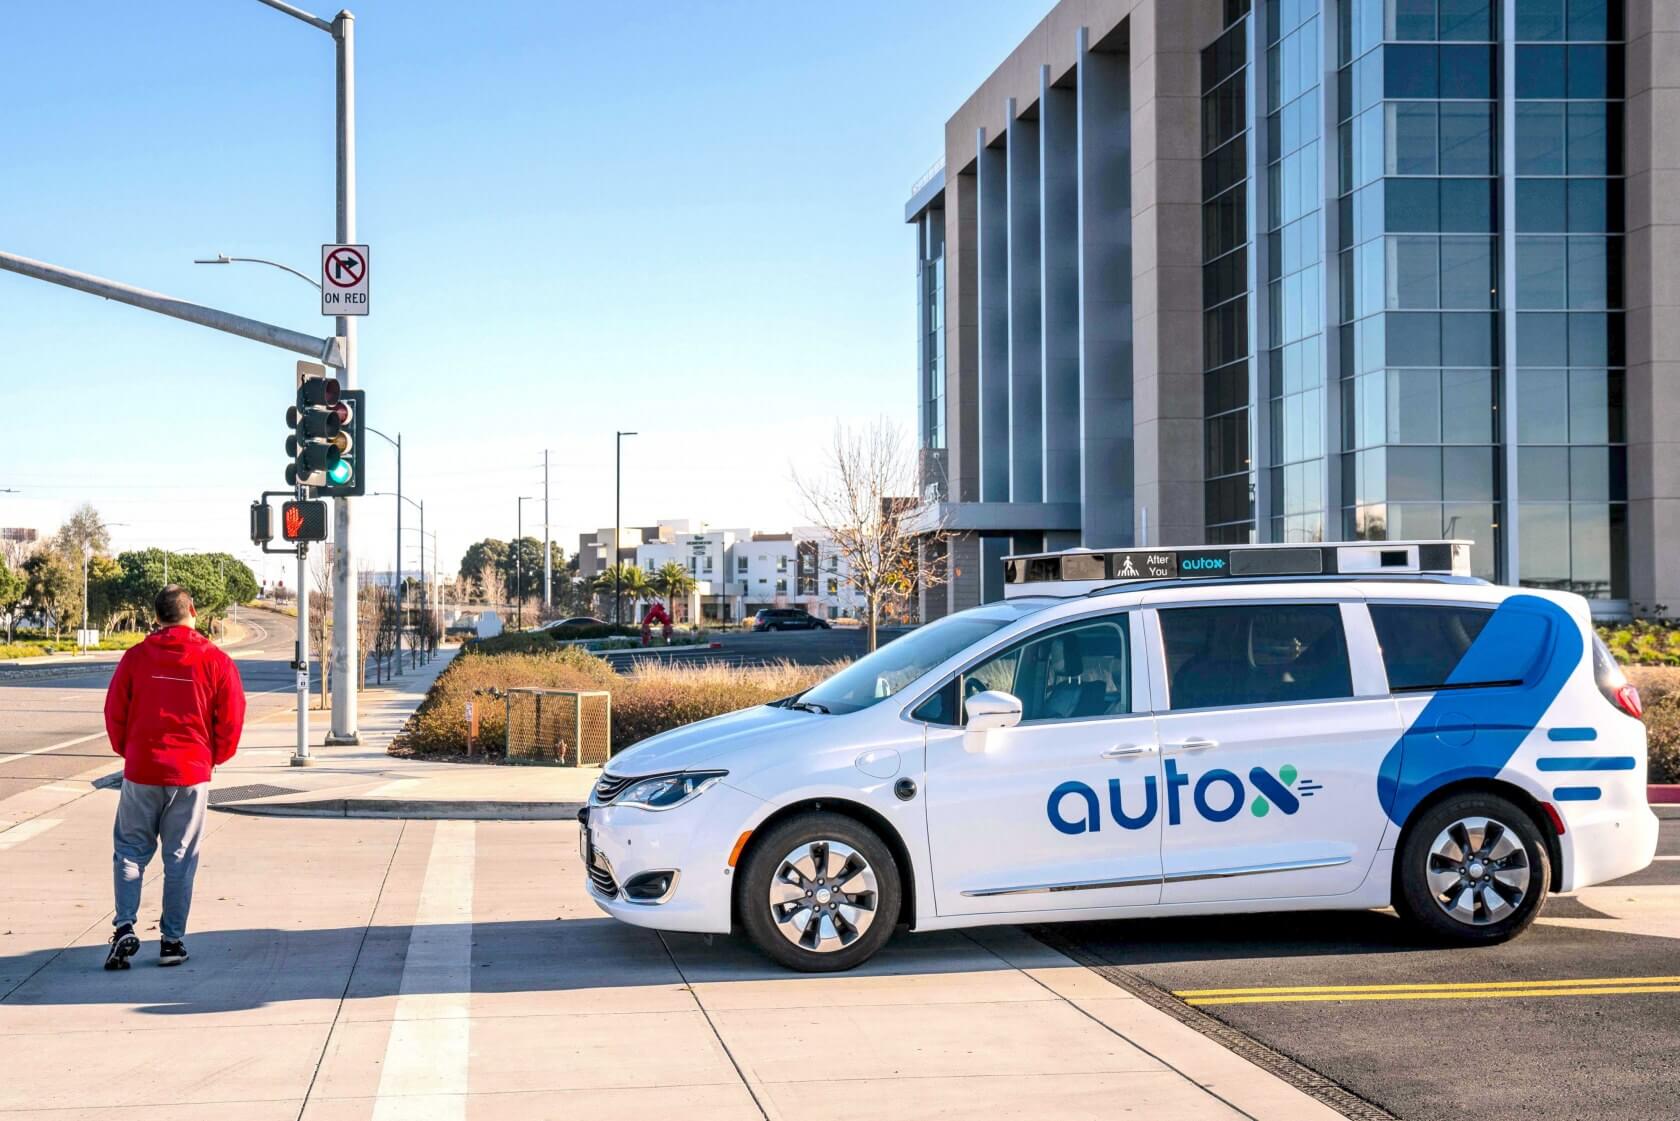 Fiat Chrysler partners with self-driving car startup AutoX to bring a robo-taxi service to China by Q3 2020